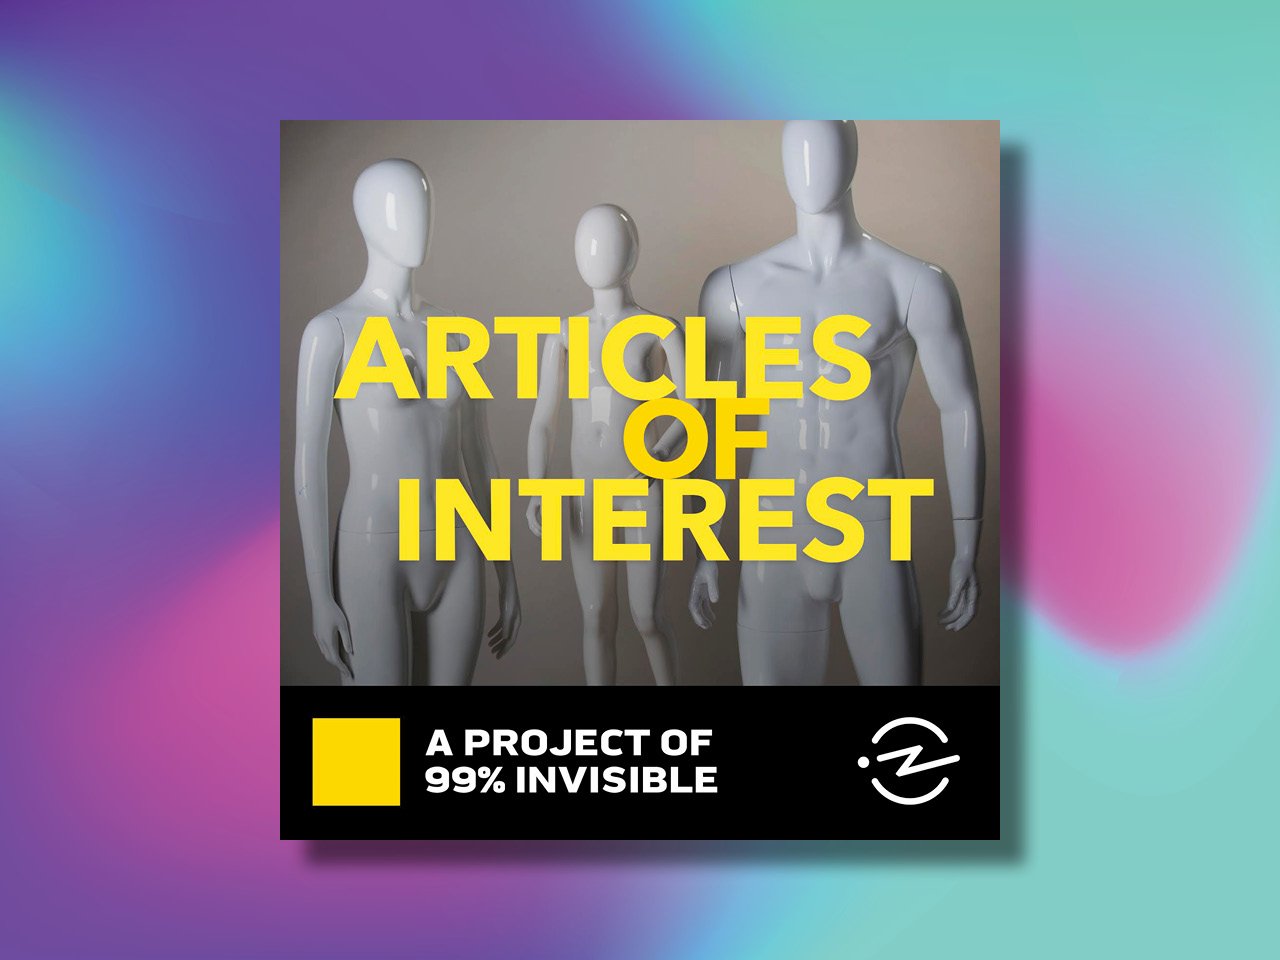 The logo of Articles of Interest